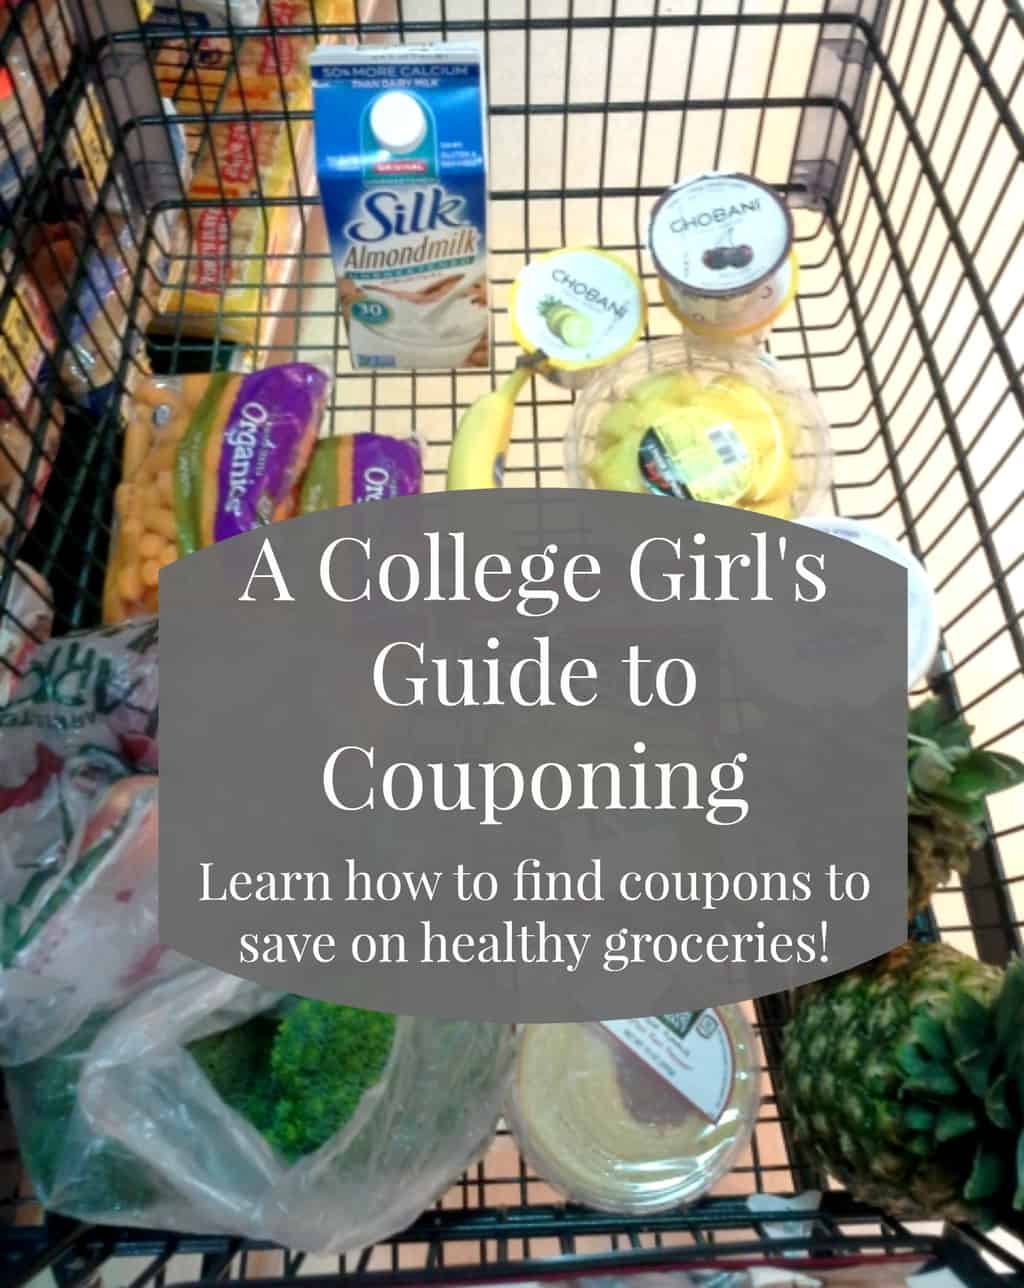 Some easy tips and tricks for saving money on groceries in college!